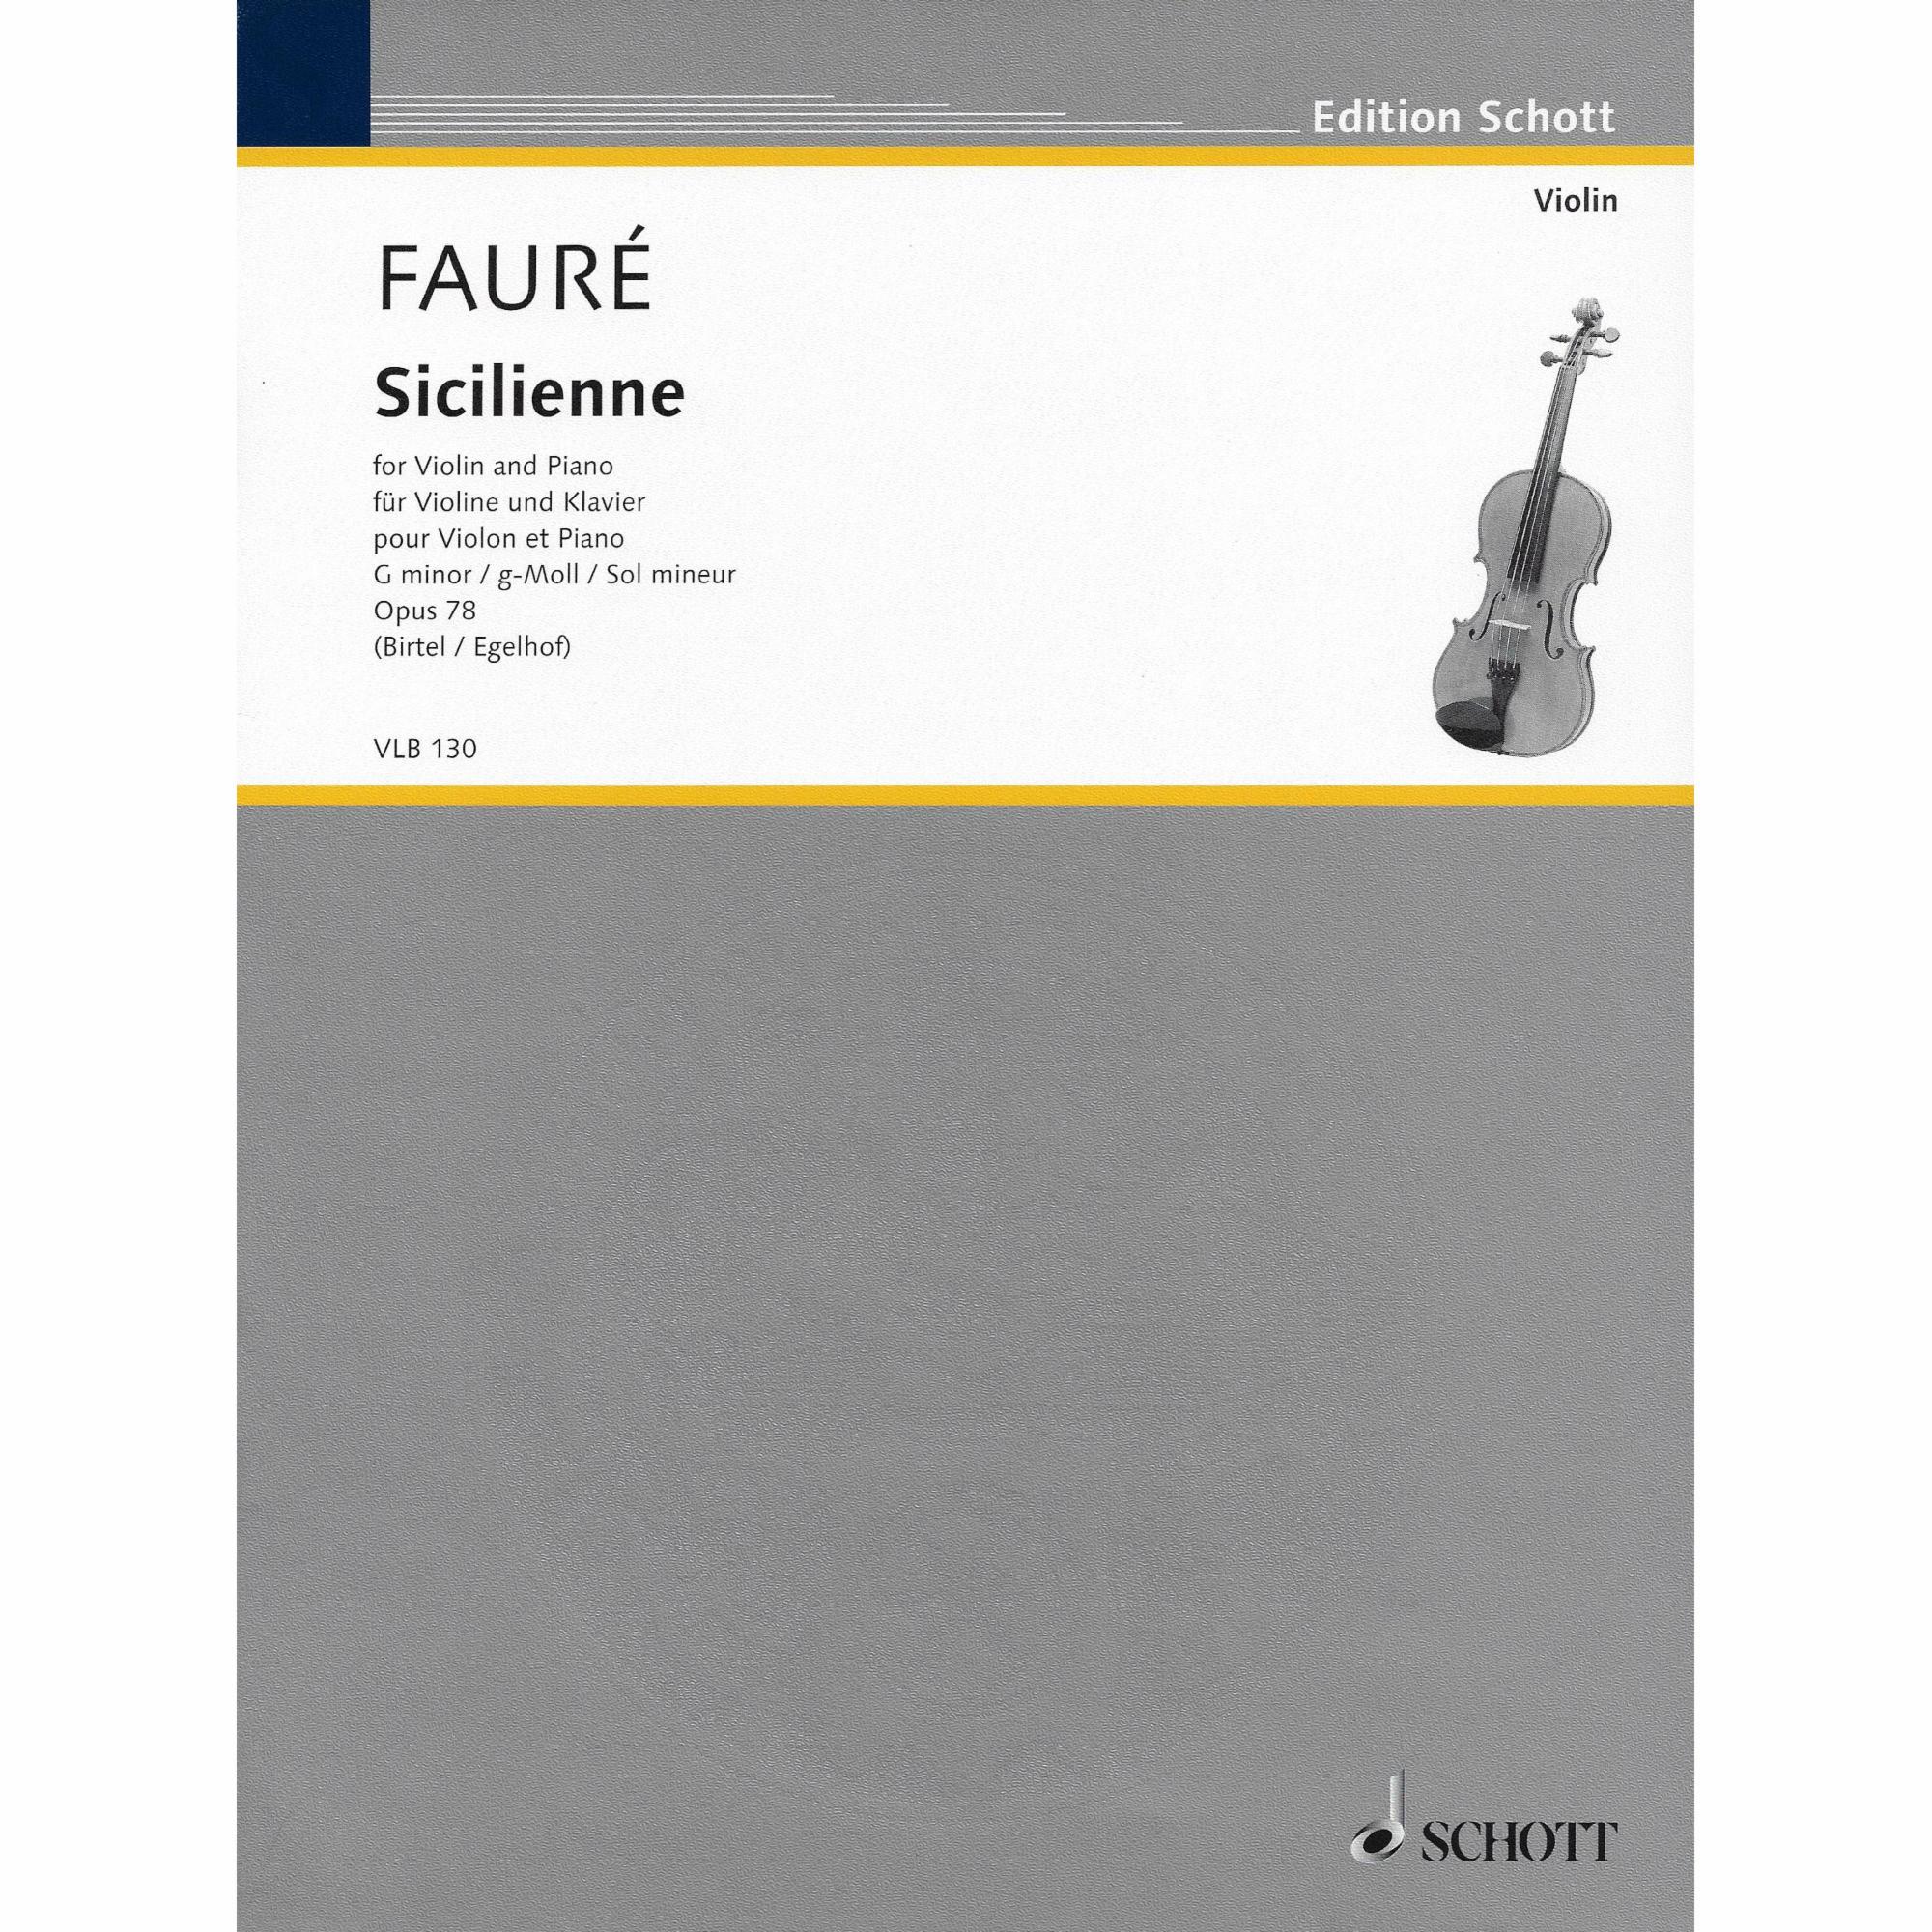 Faure -- Sicilienne in G Minor, Op. 78 for Violin and Piano